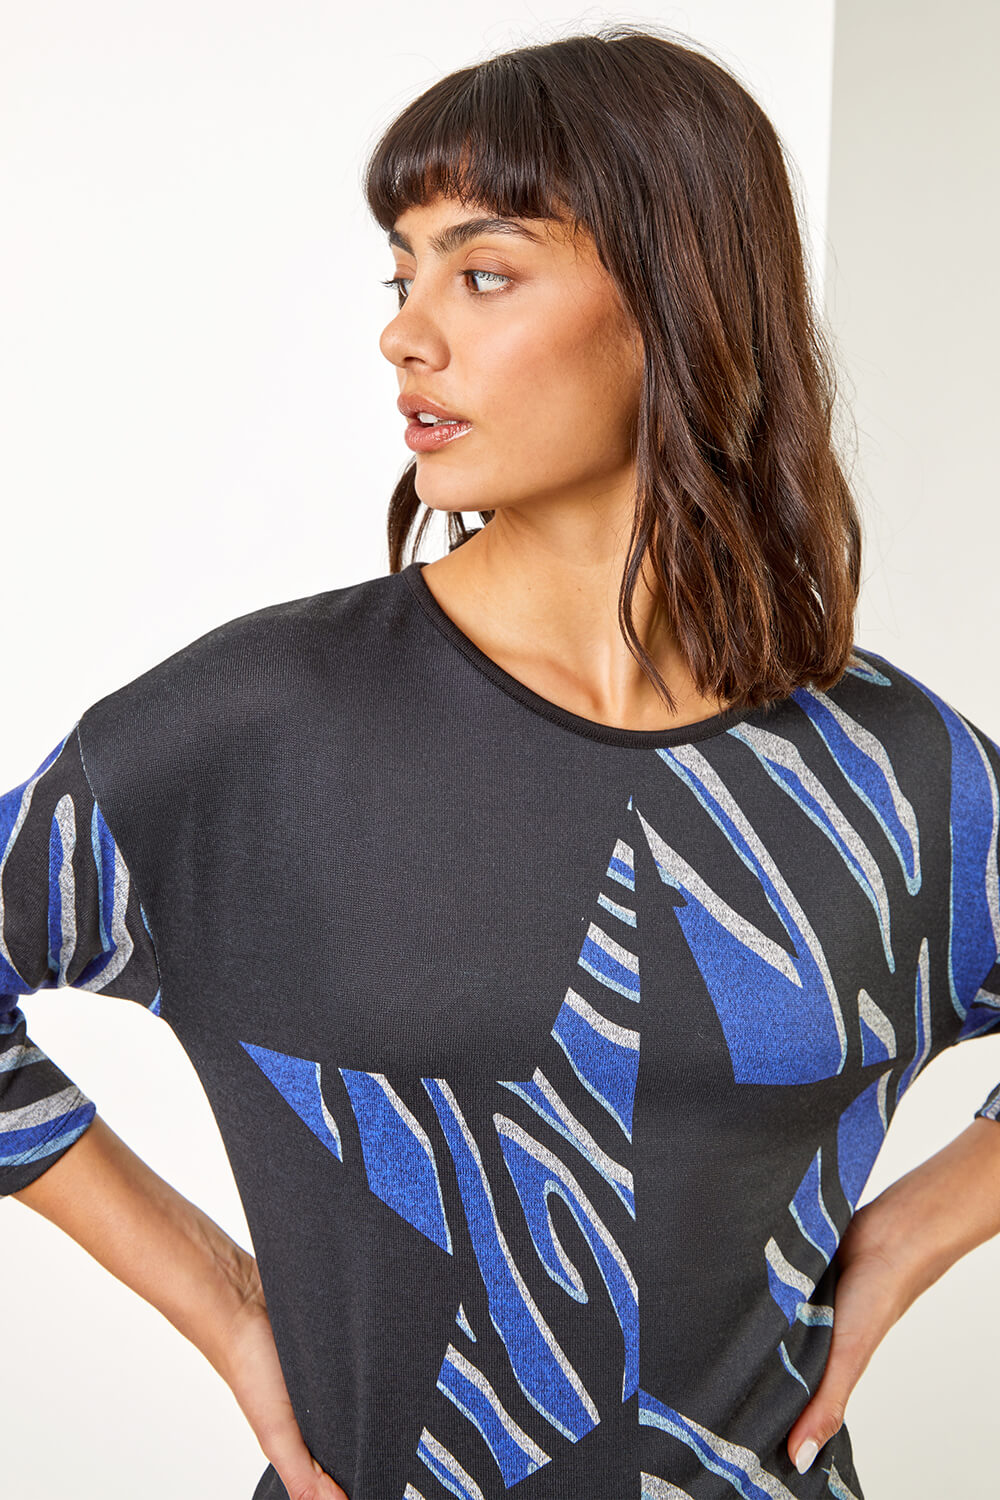 Blue Star Print Stretch Jersey Top, Image 4 of 5